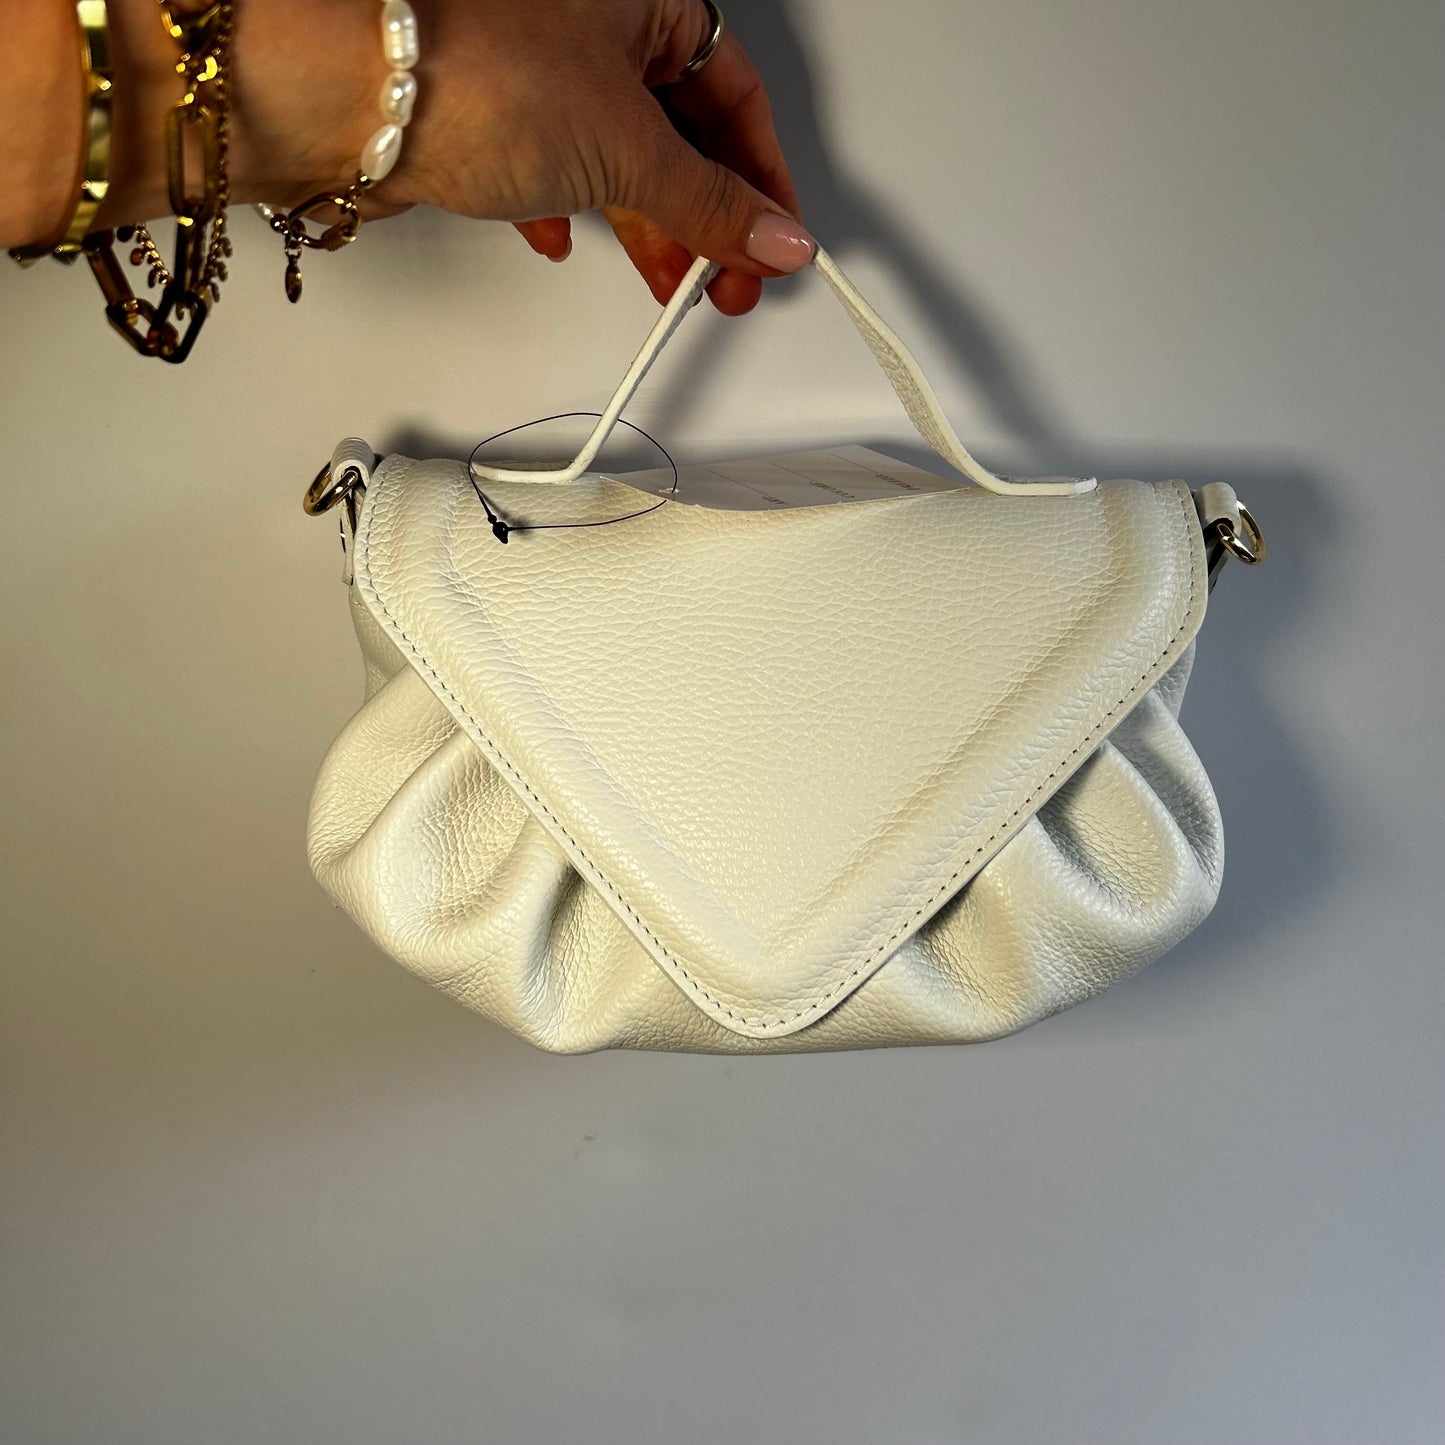 The Pleated Cross-Body Leather Clutch